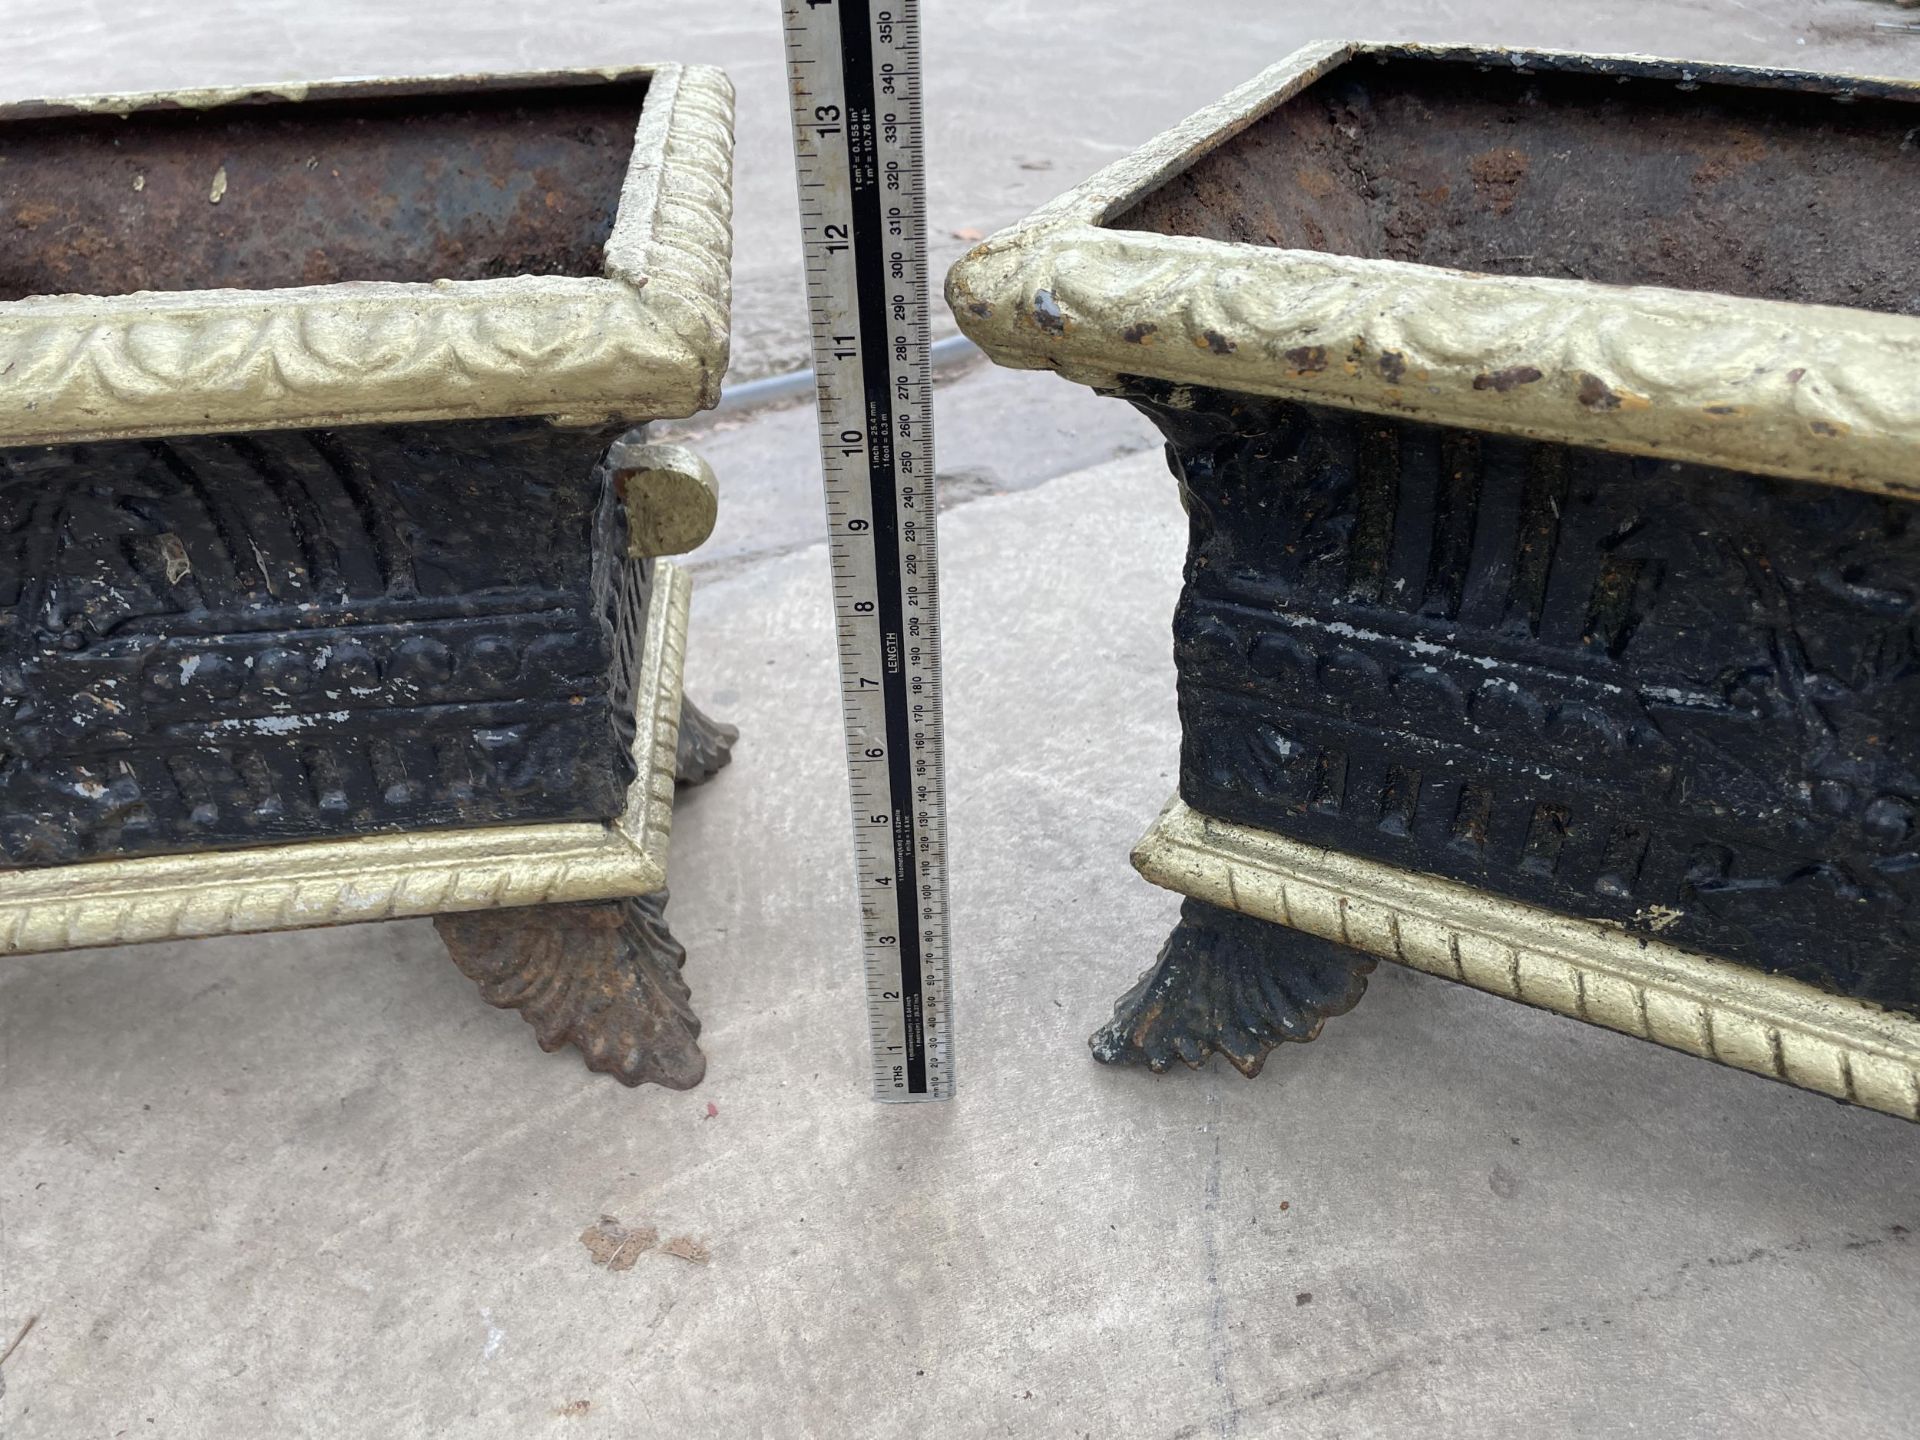 A PAIR OF VINTAGE DECORATIVE BLACK AND GOLD PAINTED CAST IRON TROUGH PLANTERS - Image 5 of 7